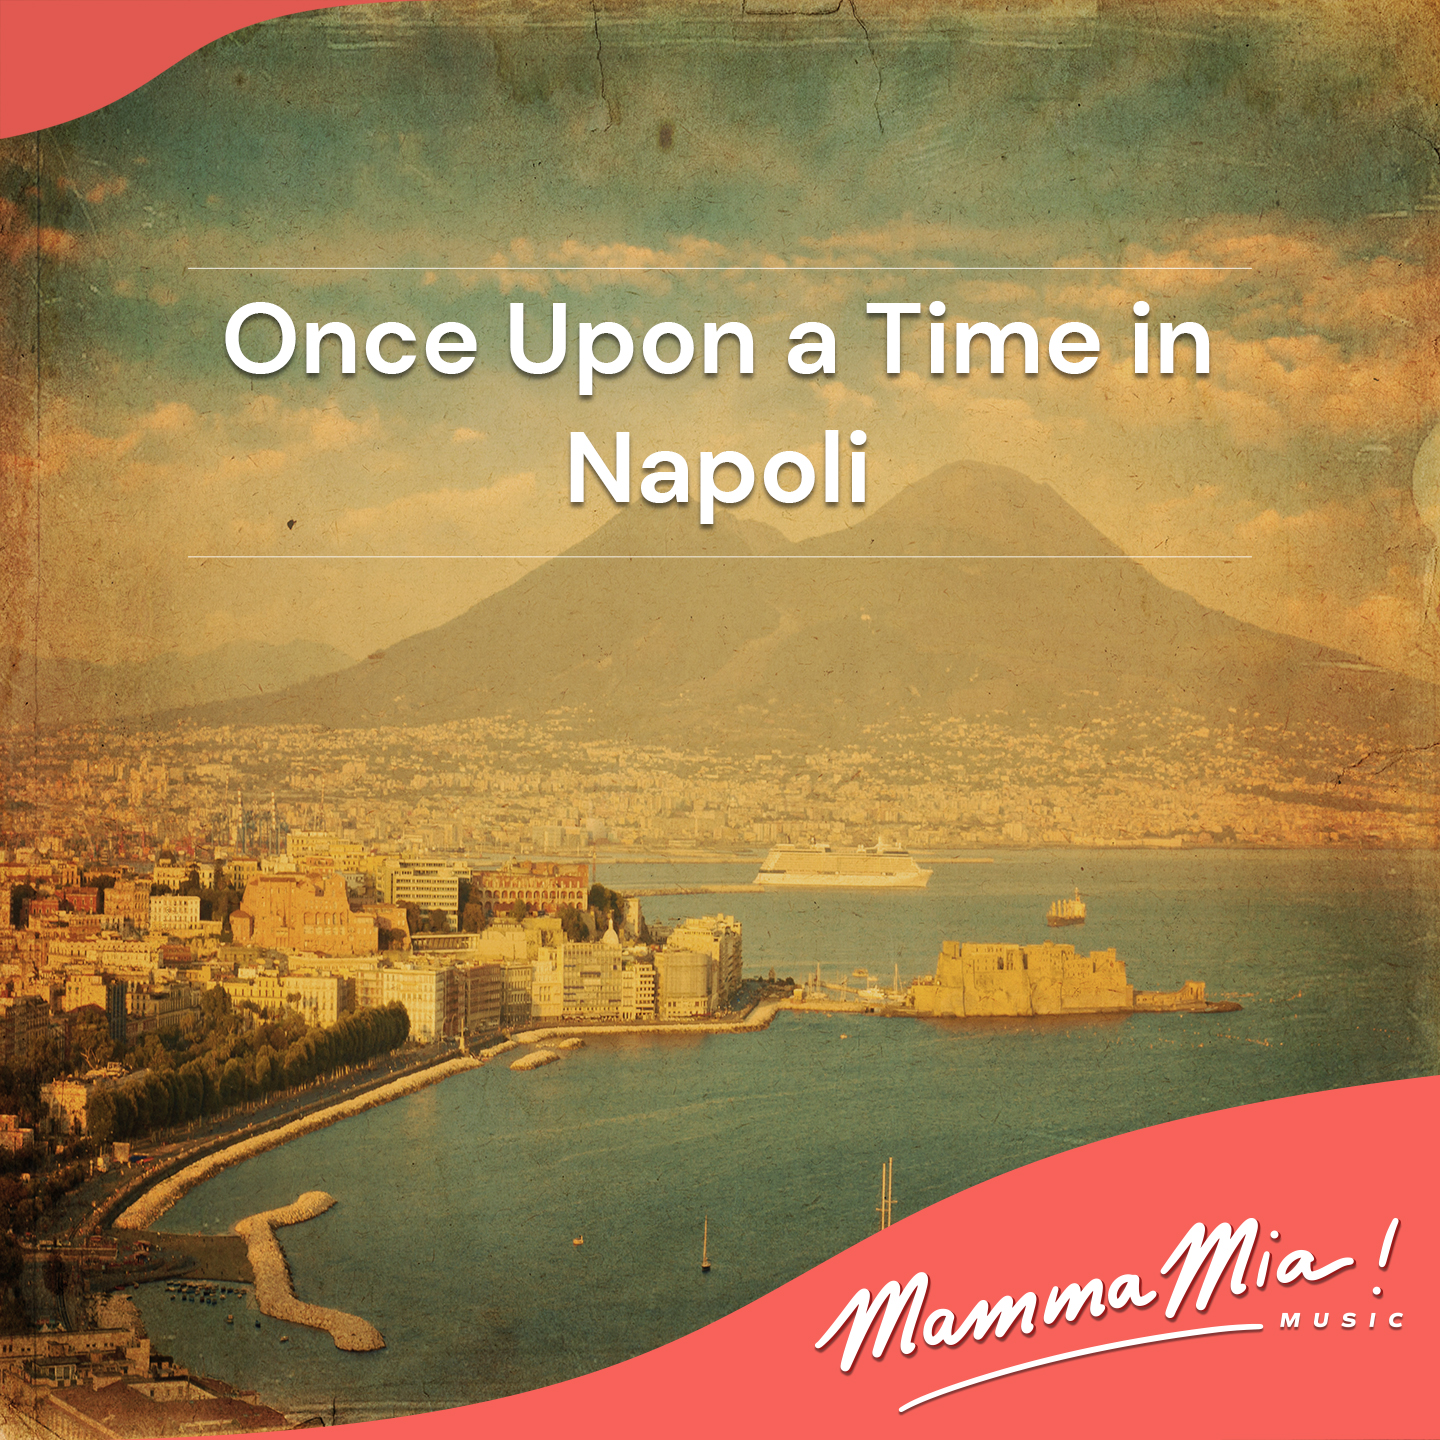 Once Upon a Time in Napoli